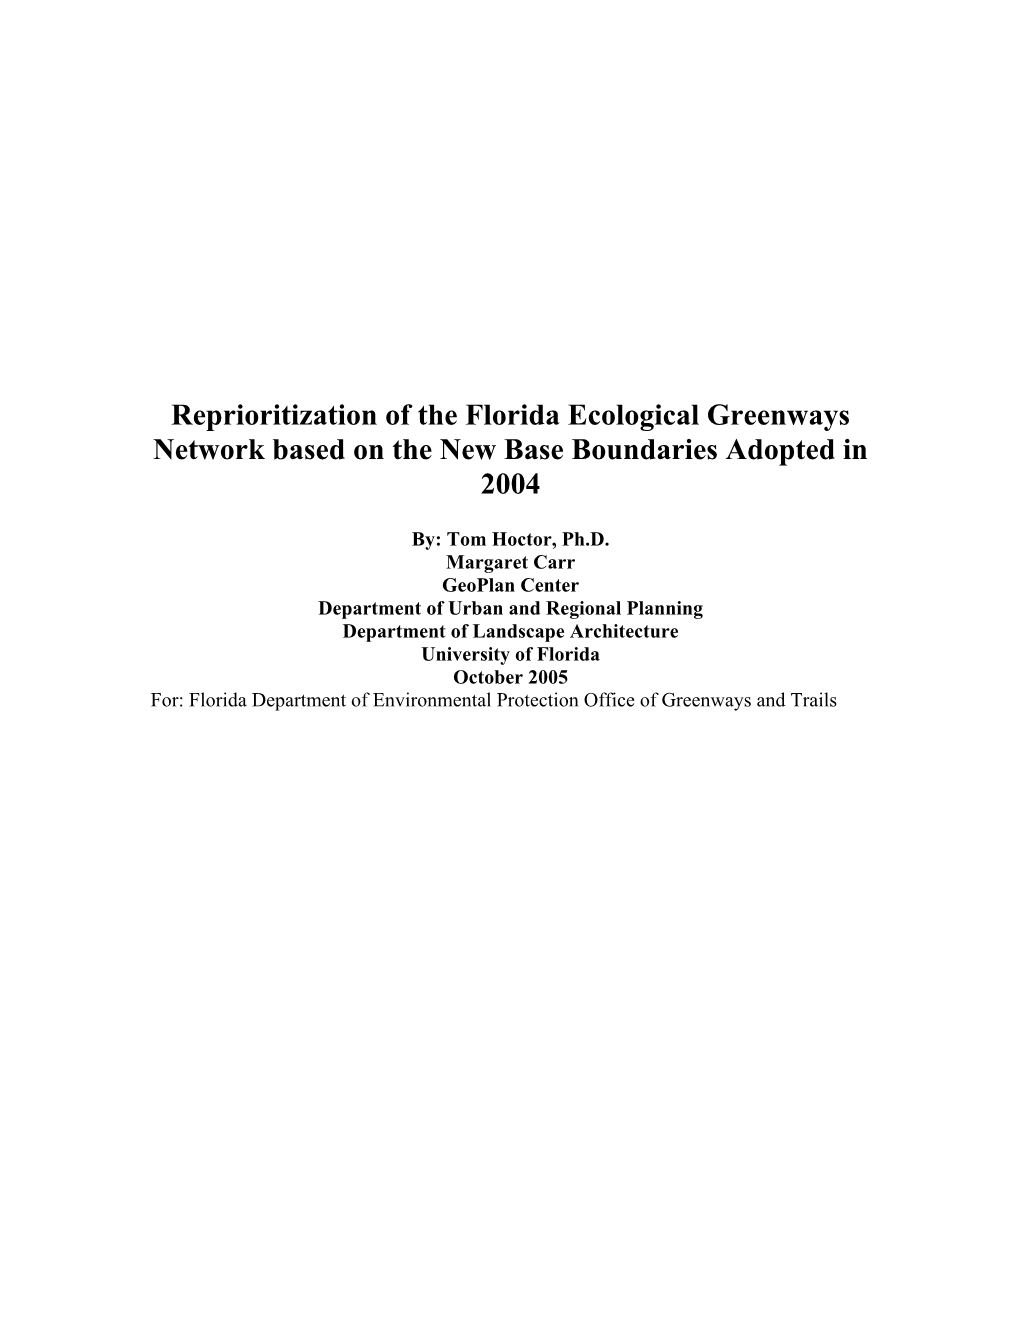 2004 Reprioritization of the Florida Ecological Greenways Network